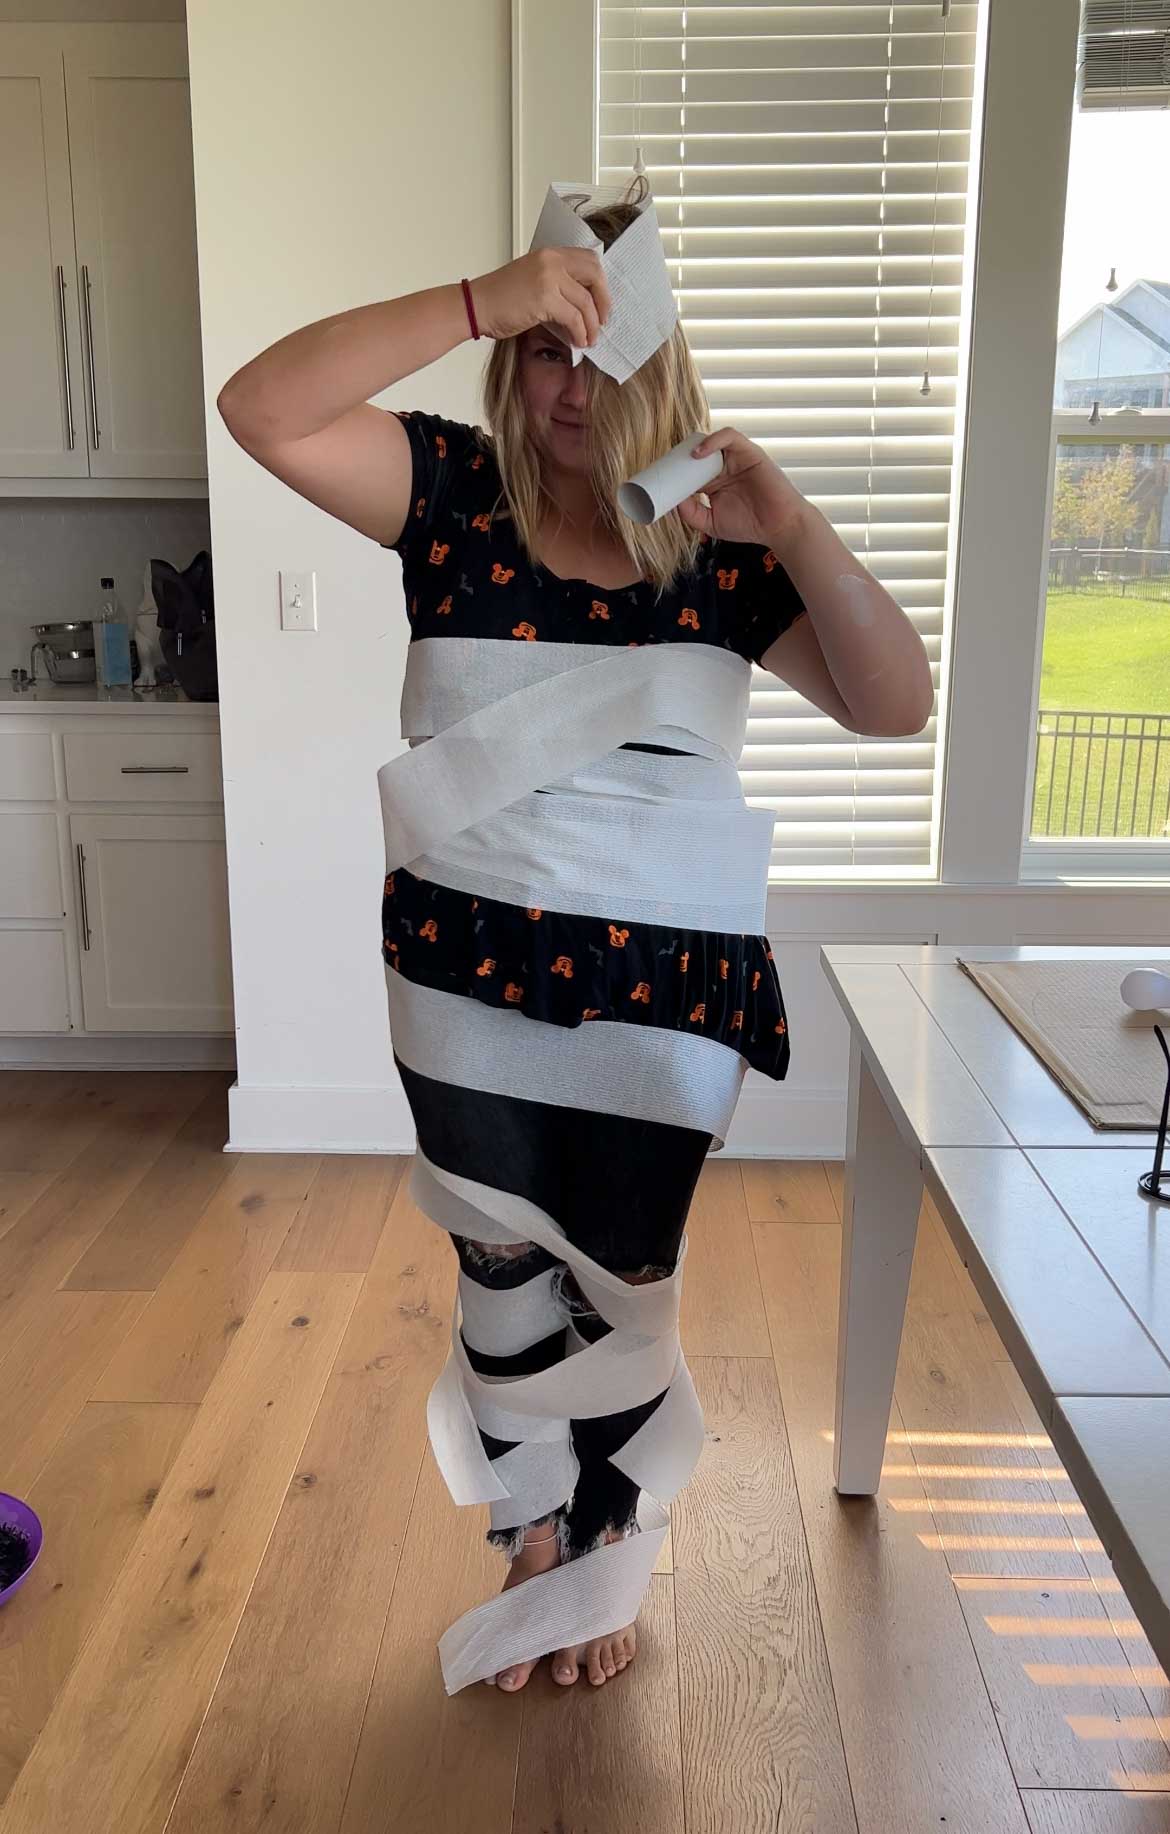 woman wrapping herself like a mummy in toilet paper